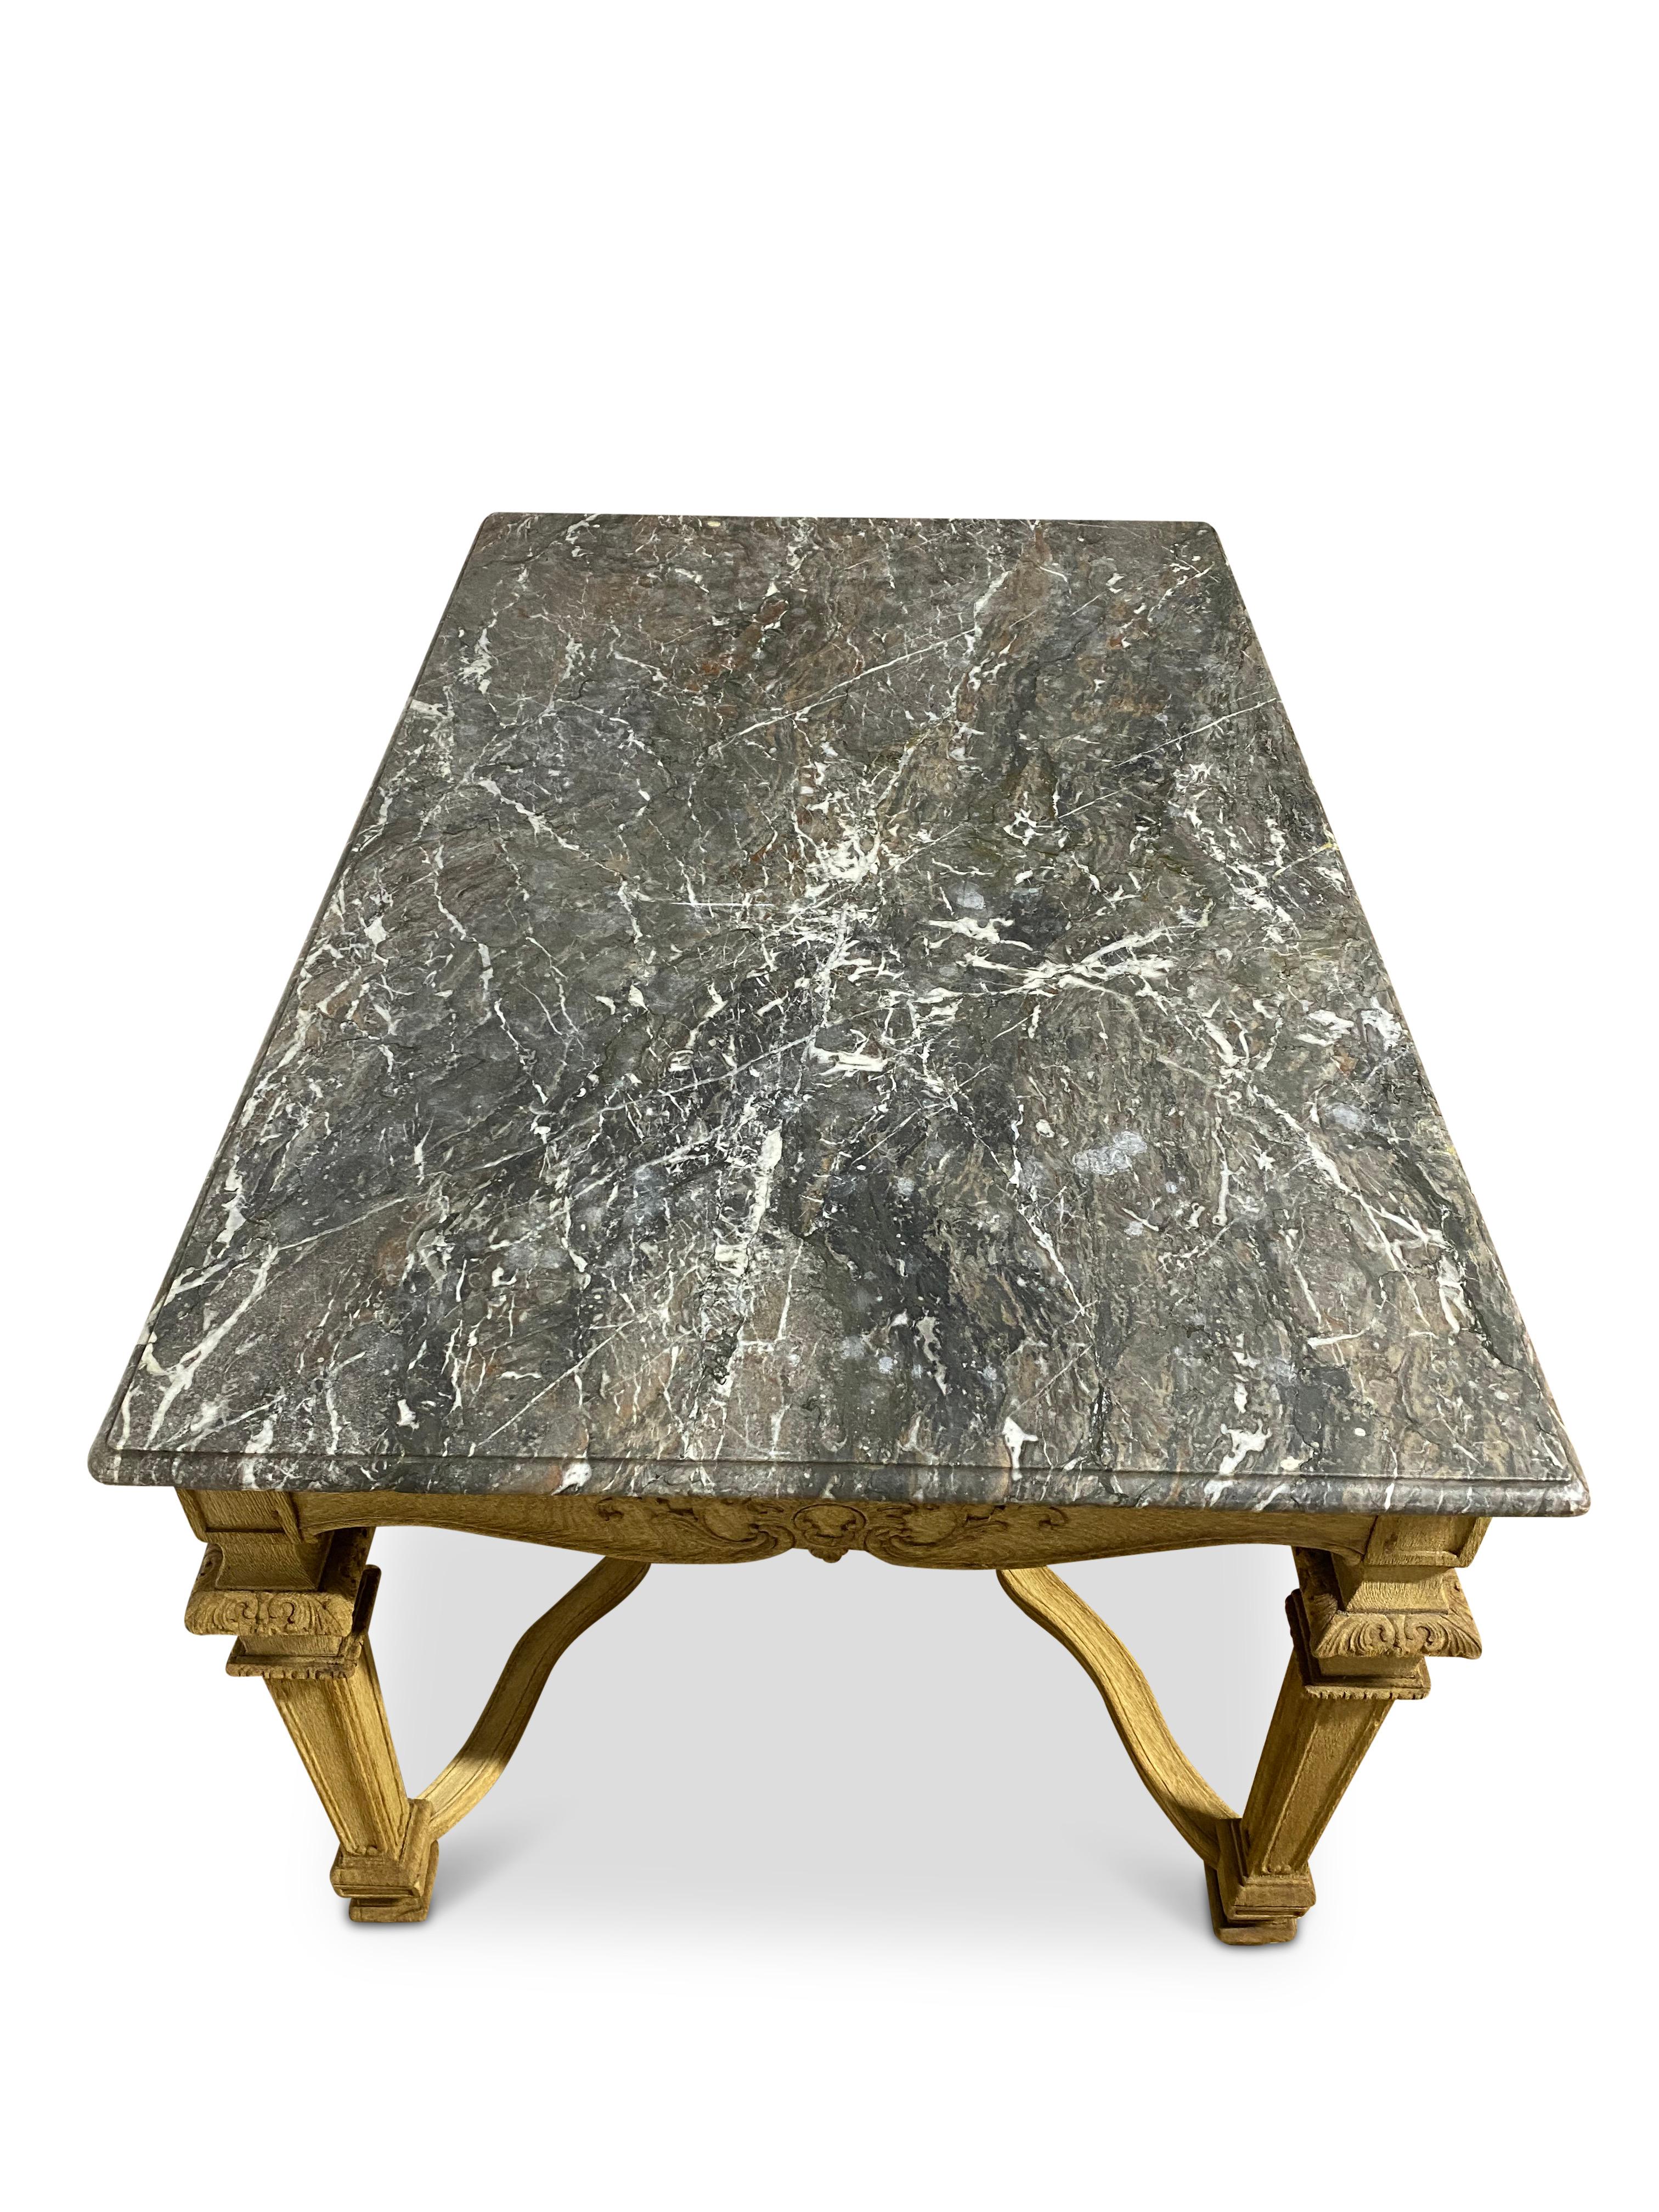 Bleached French Provincial Center Table with Original Breccia Marble Top For Sale